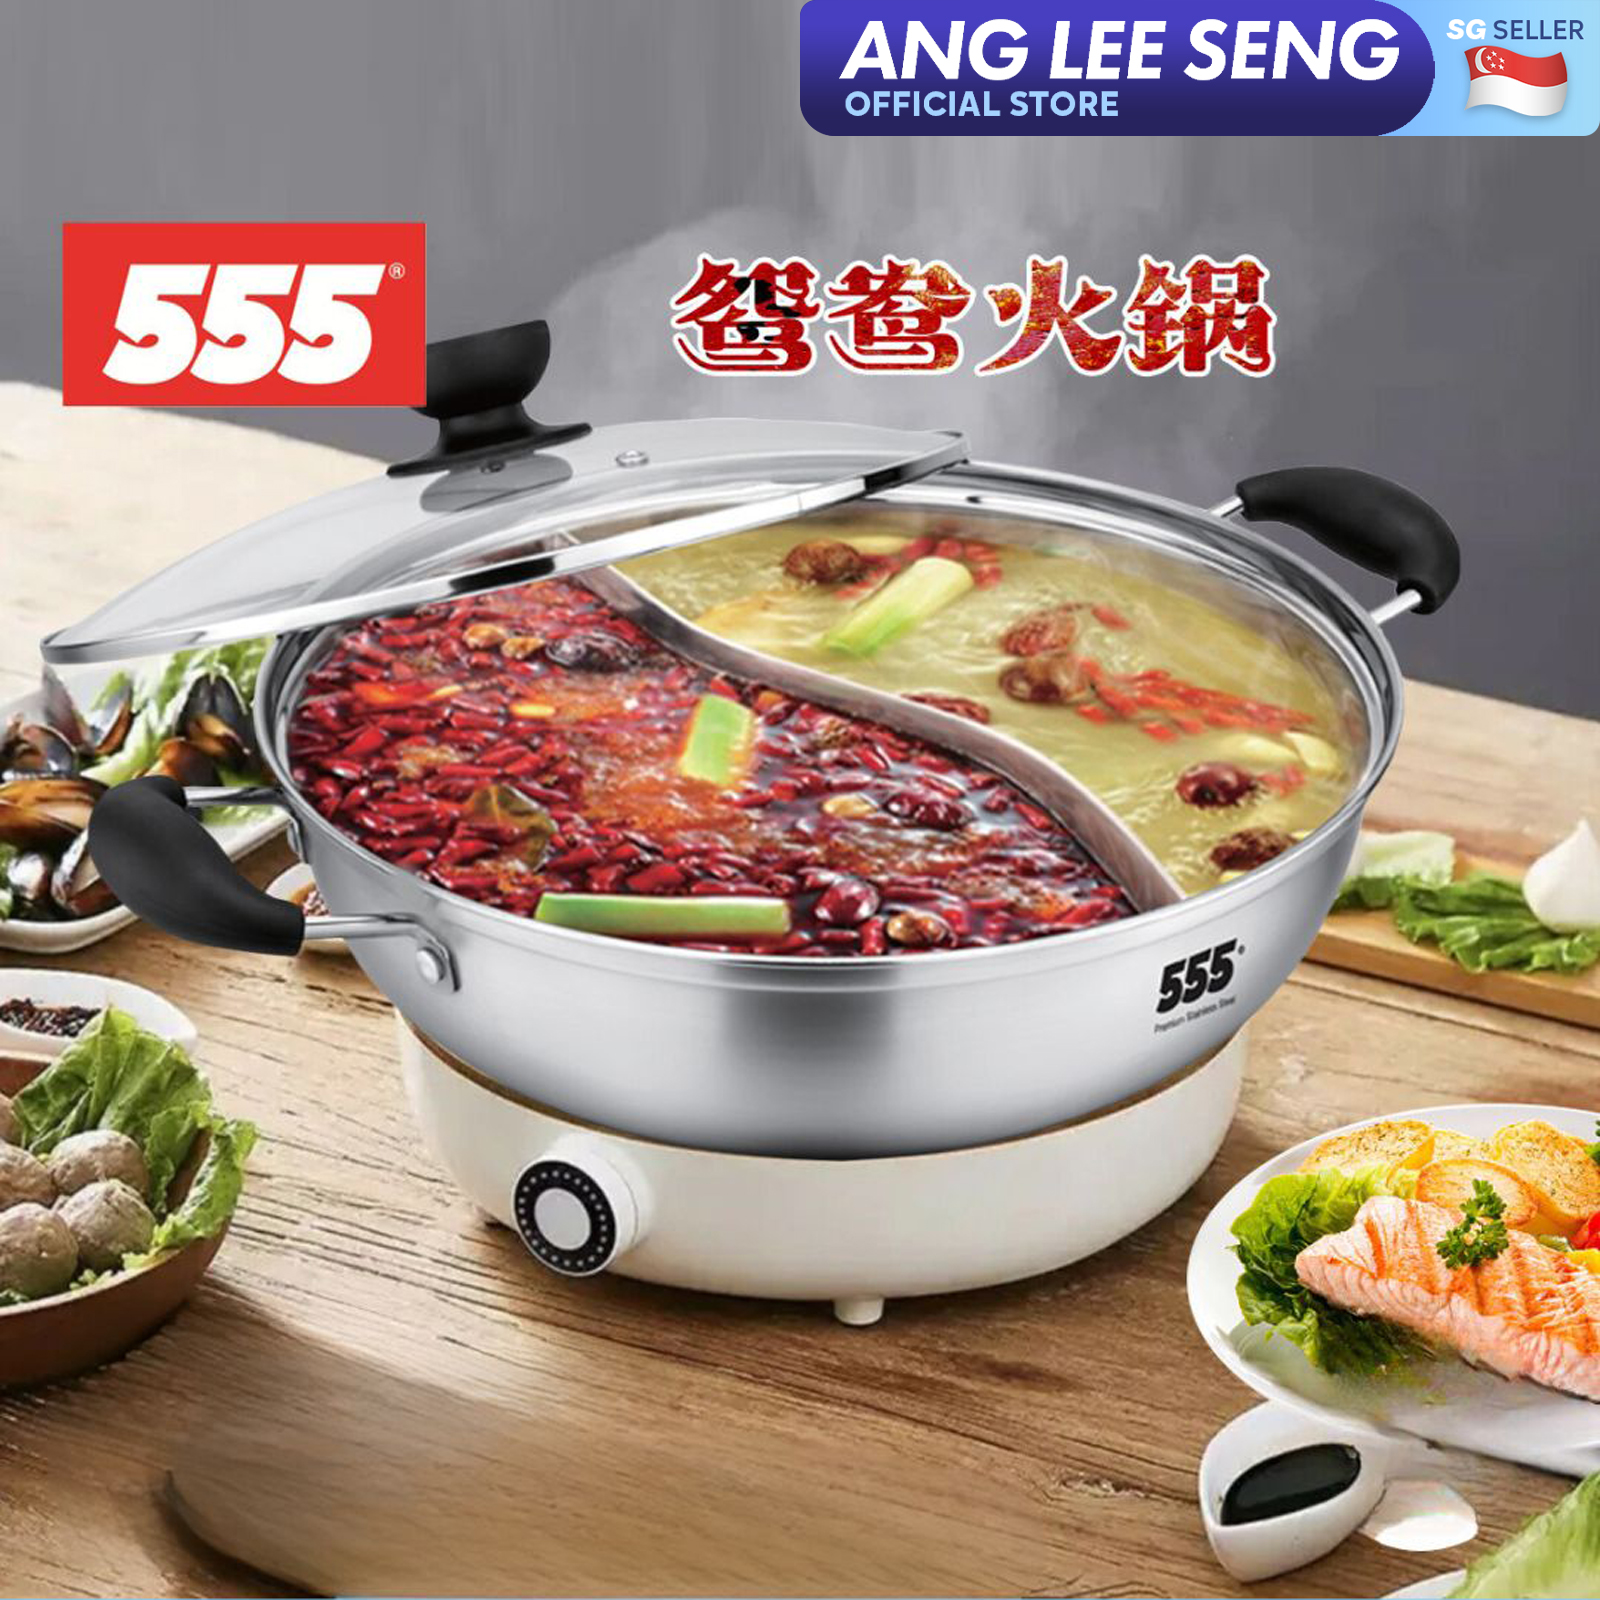 555 Stainless Steel Yuanyang 2-Sided Hot Pot with 2-pc Amark S/S Strainer & Ladle Set